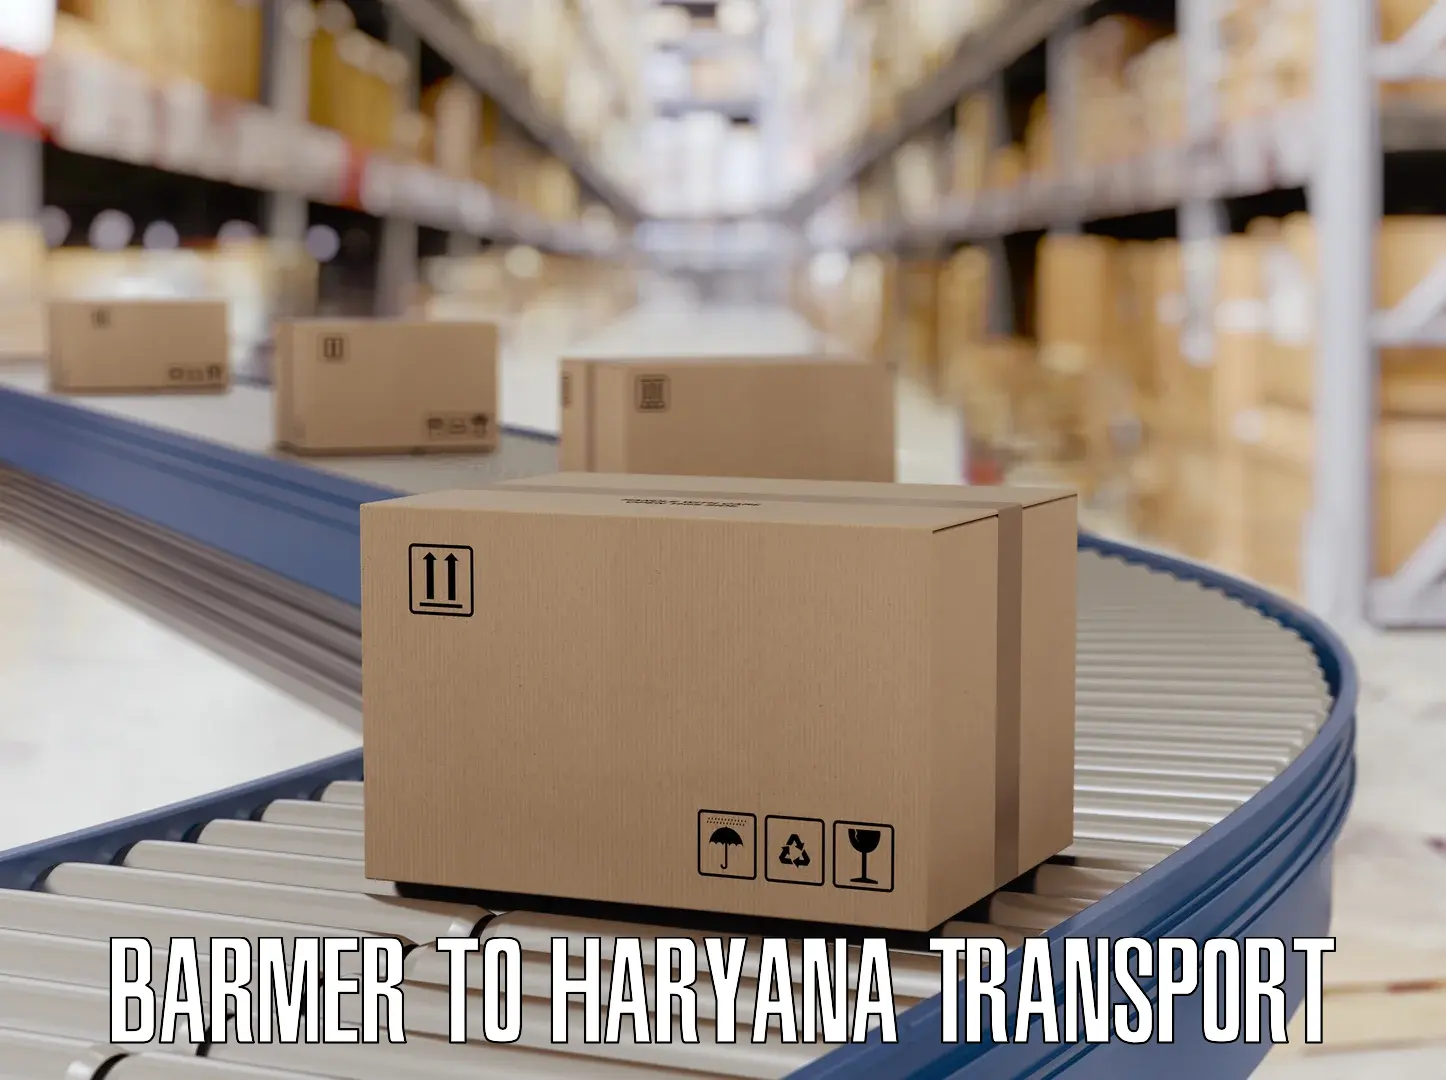 Express transport services in Barmer to Bilaspur Haryana